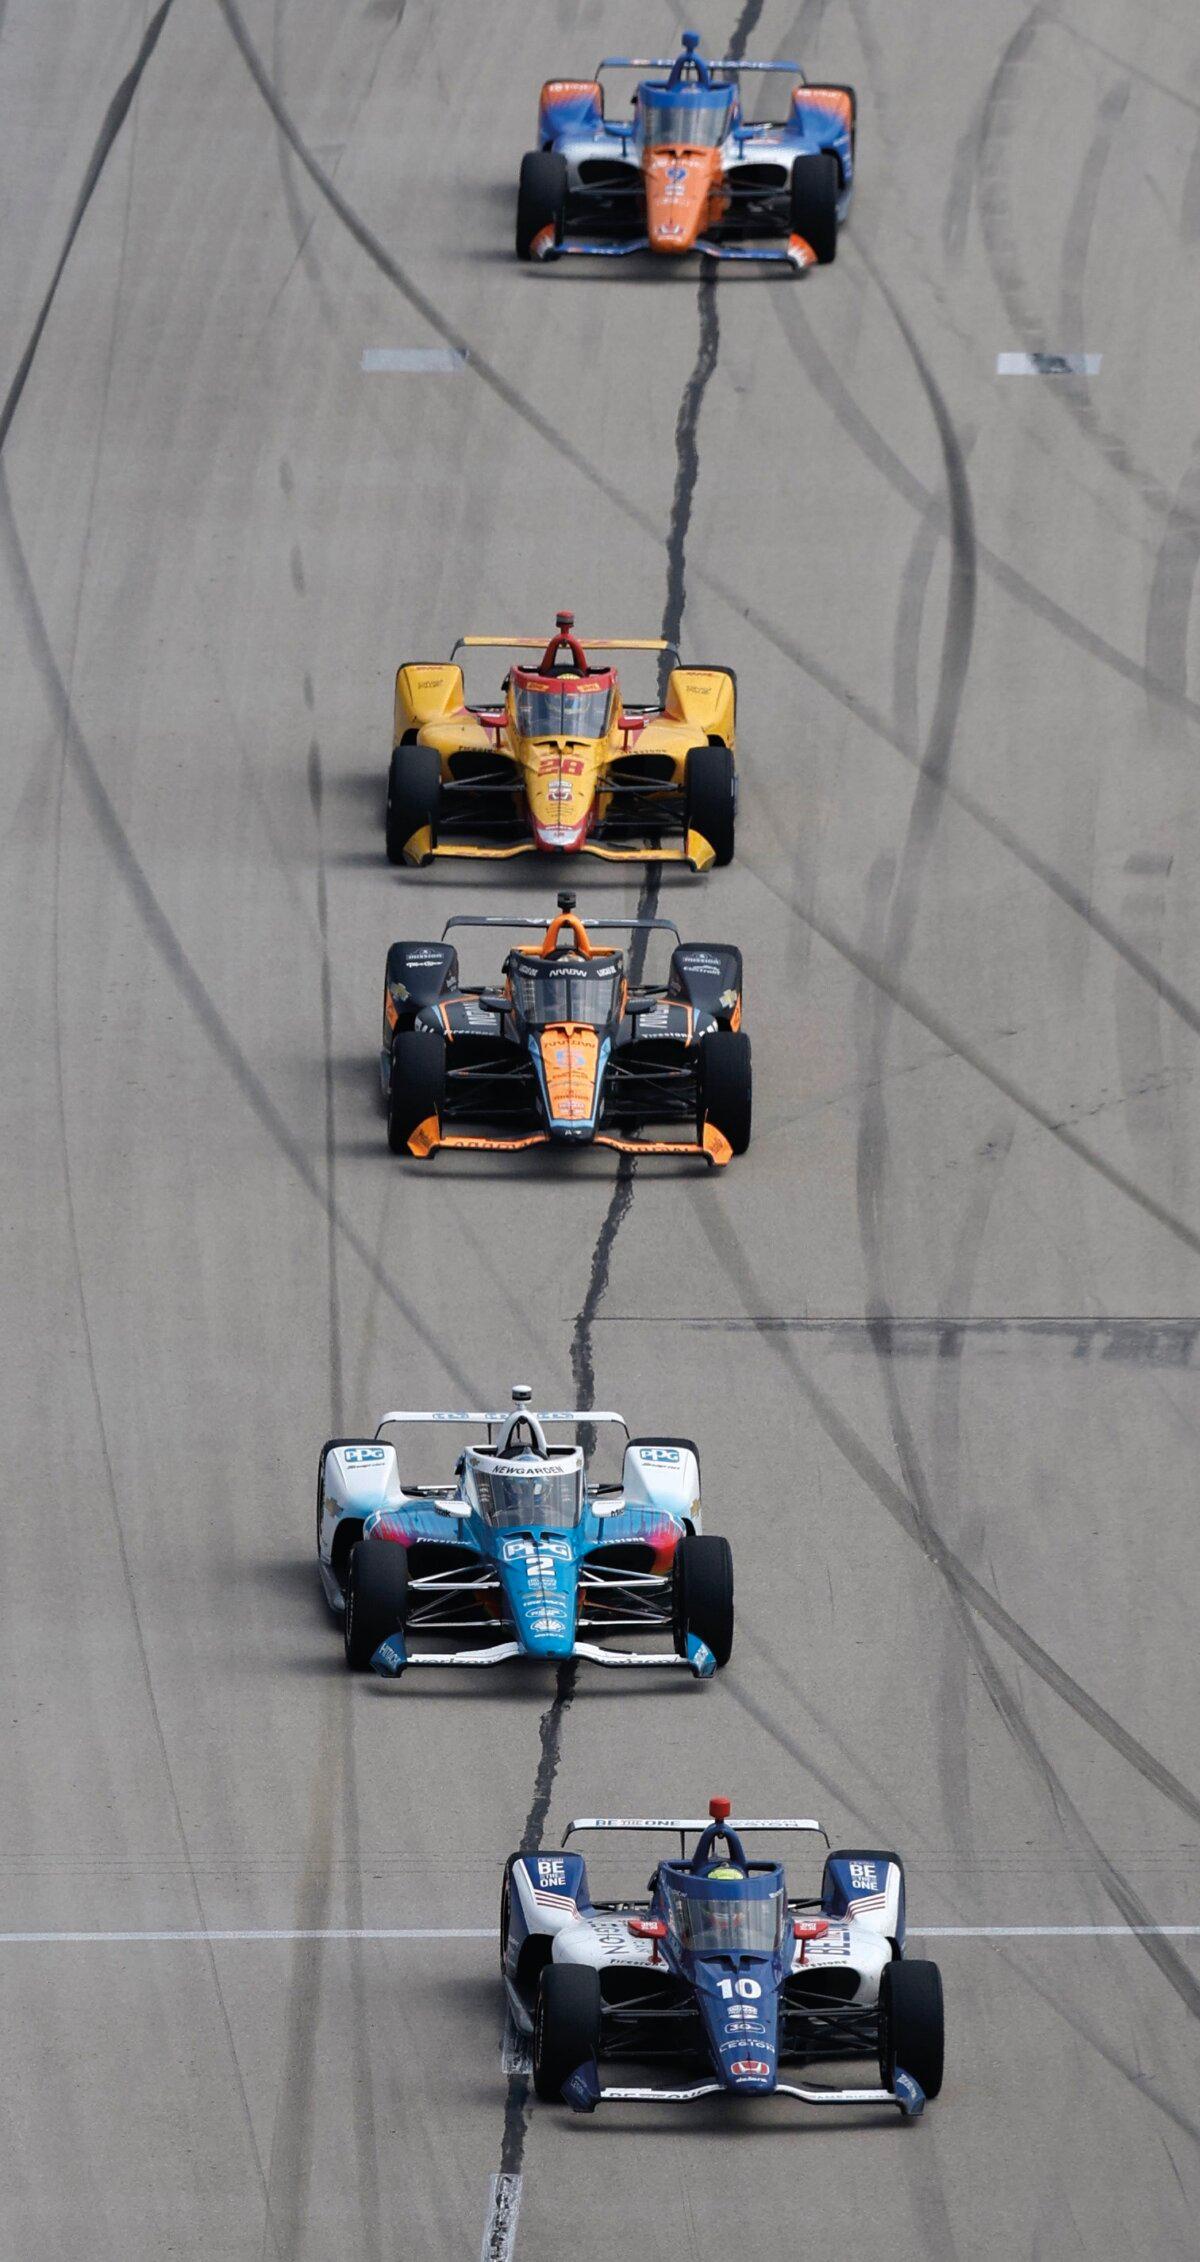 Mr. Newgarden (#2 Team Penske Chevrolet) and other drivers in a tight race during the NTT IndyCar Series at the Texas Motor Speedway in Fort Worth, April 2023. (Sean Gardner/Stringer/Getty Images Sport)